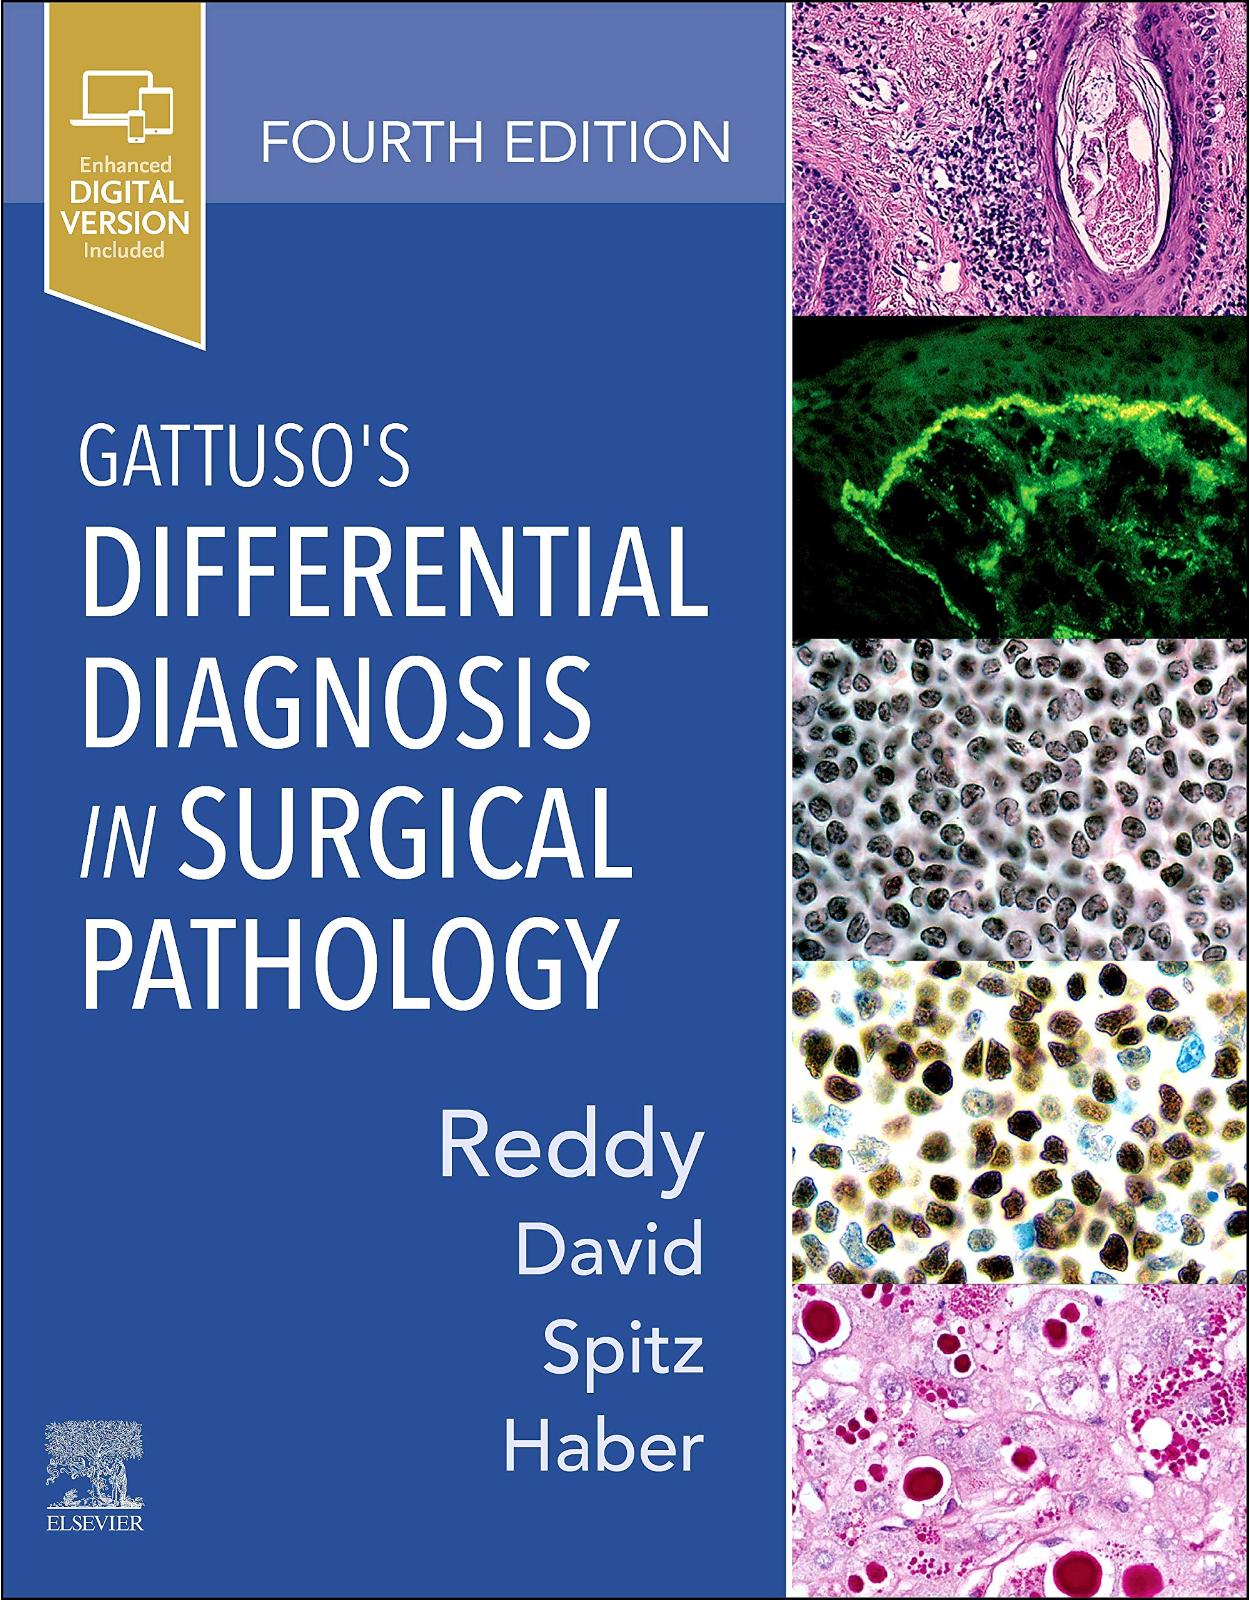 Gattuso’s Differential Diagnosis in Surgical Pathology